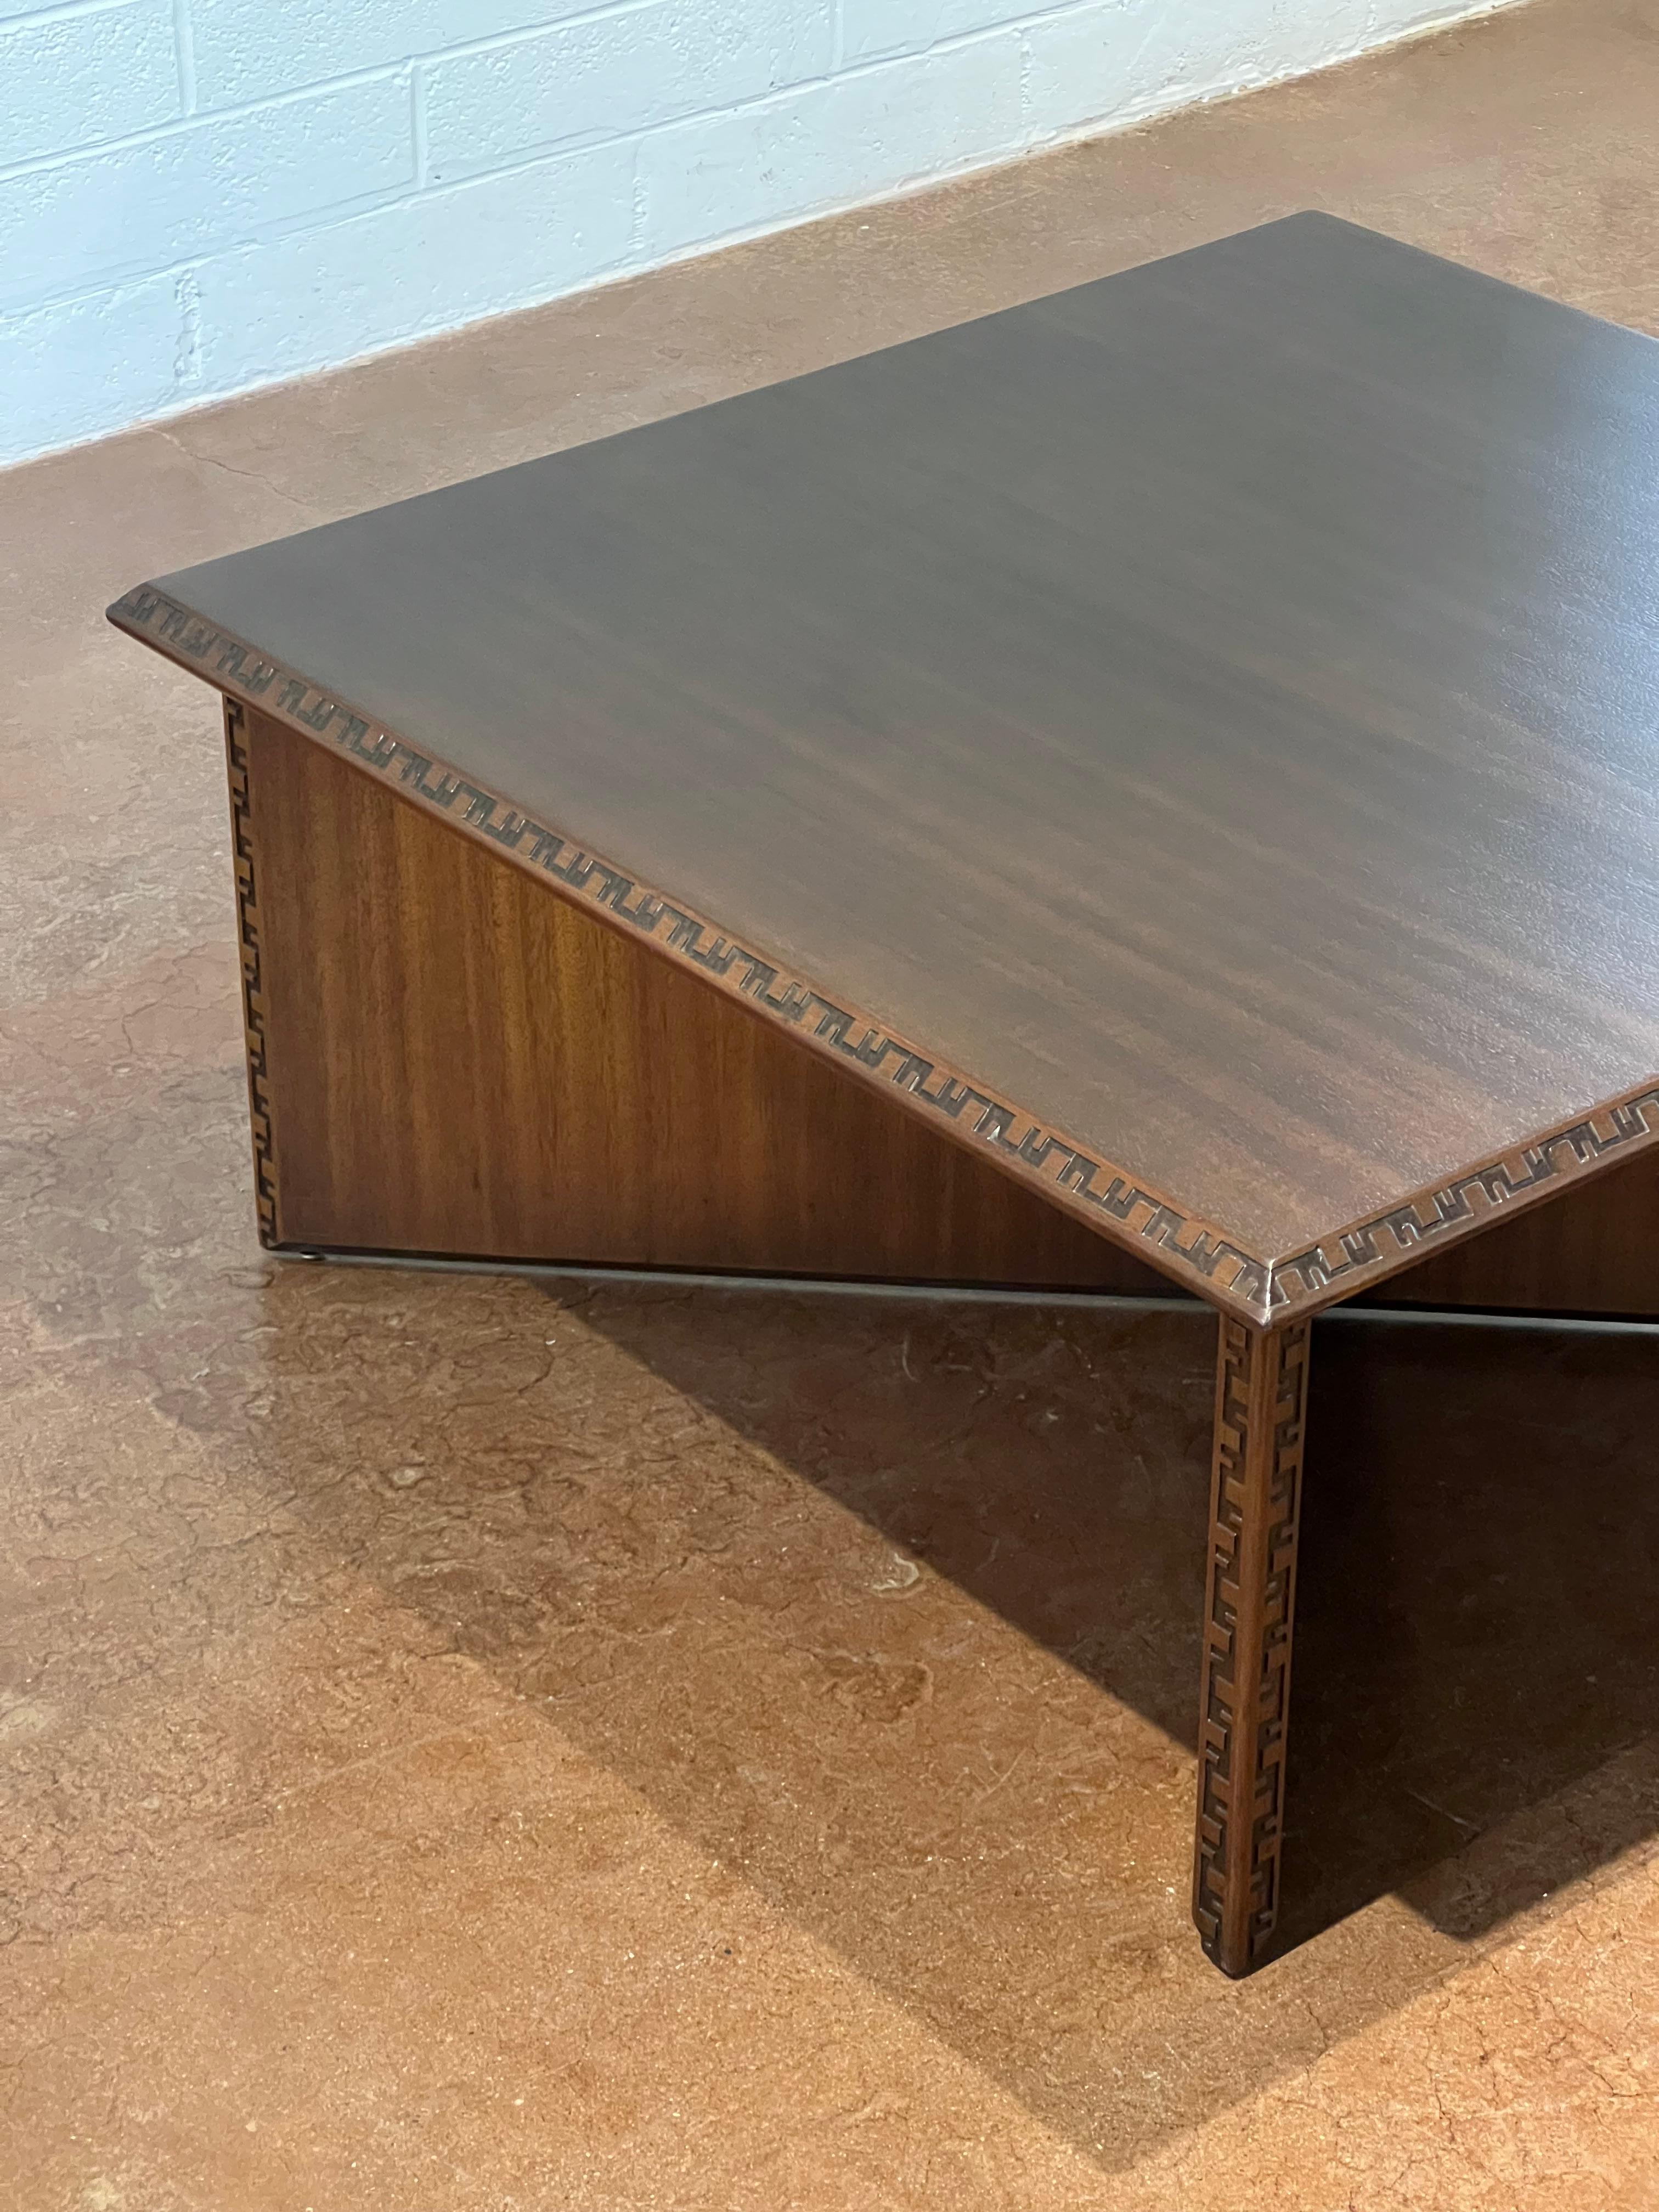 Part of the Taliesin collection that Frank Lloyd Wright designed for Henredon, this mahogany coffee table is a timeless piece. 